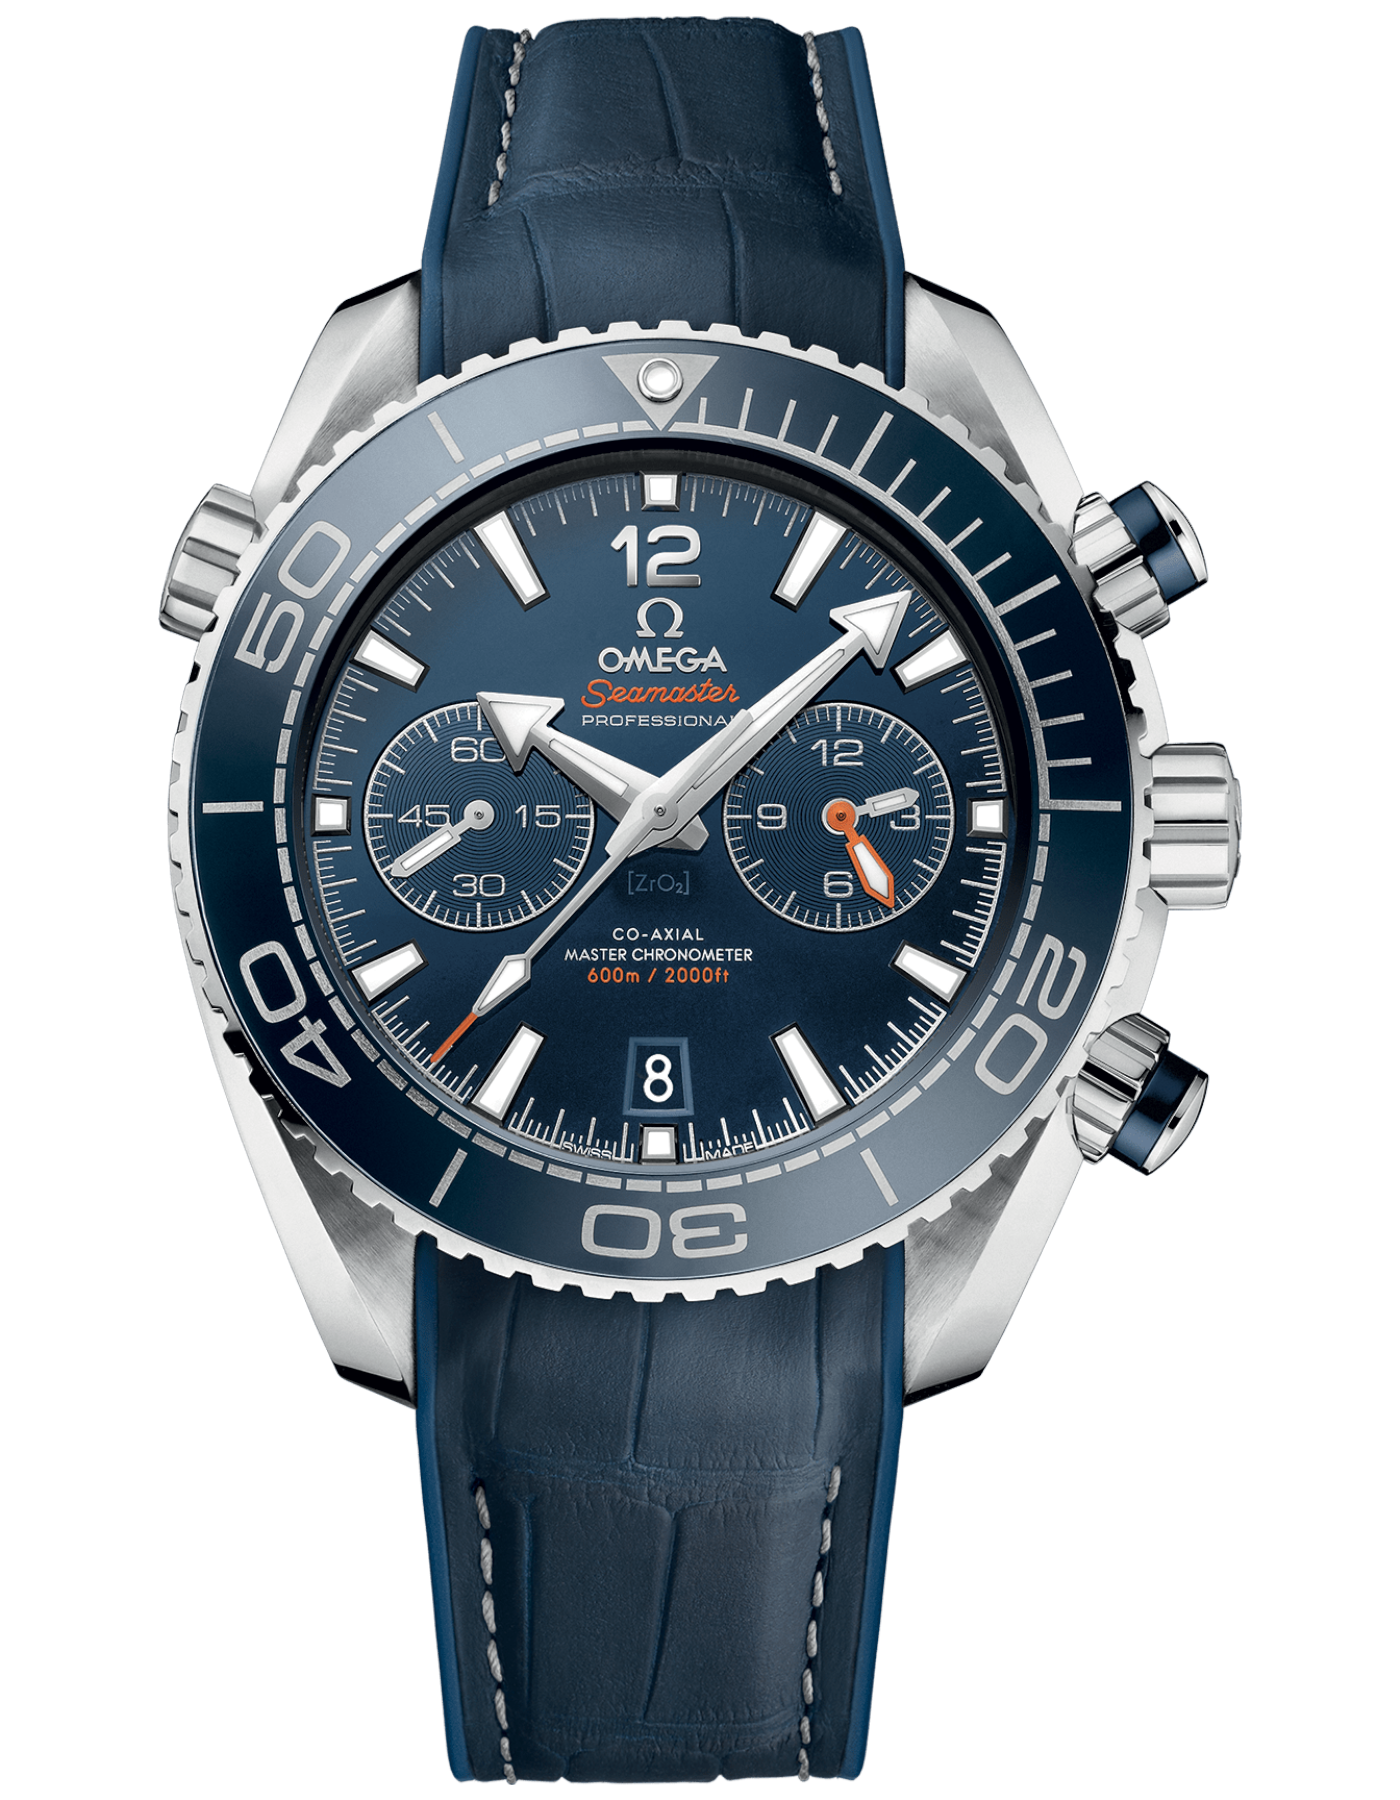 SEAMASTER PLANET OCEAN 600M CO‑AXIAL MASTER CHRONOMETER CHRONOGRAPH 45.5 MM